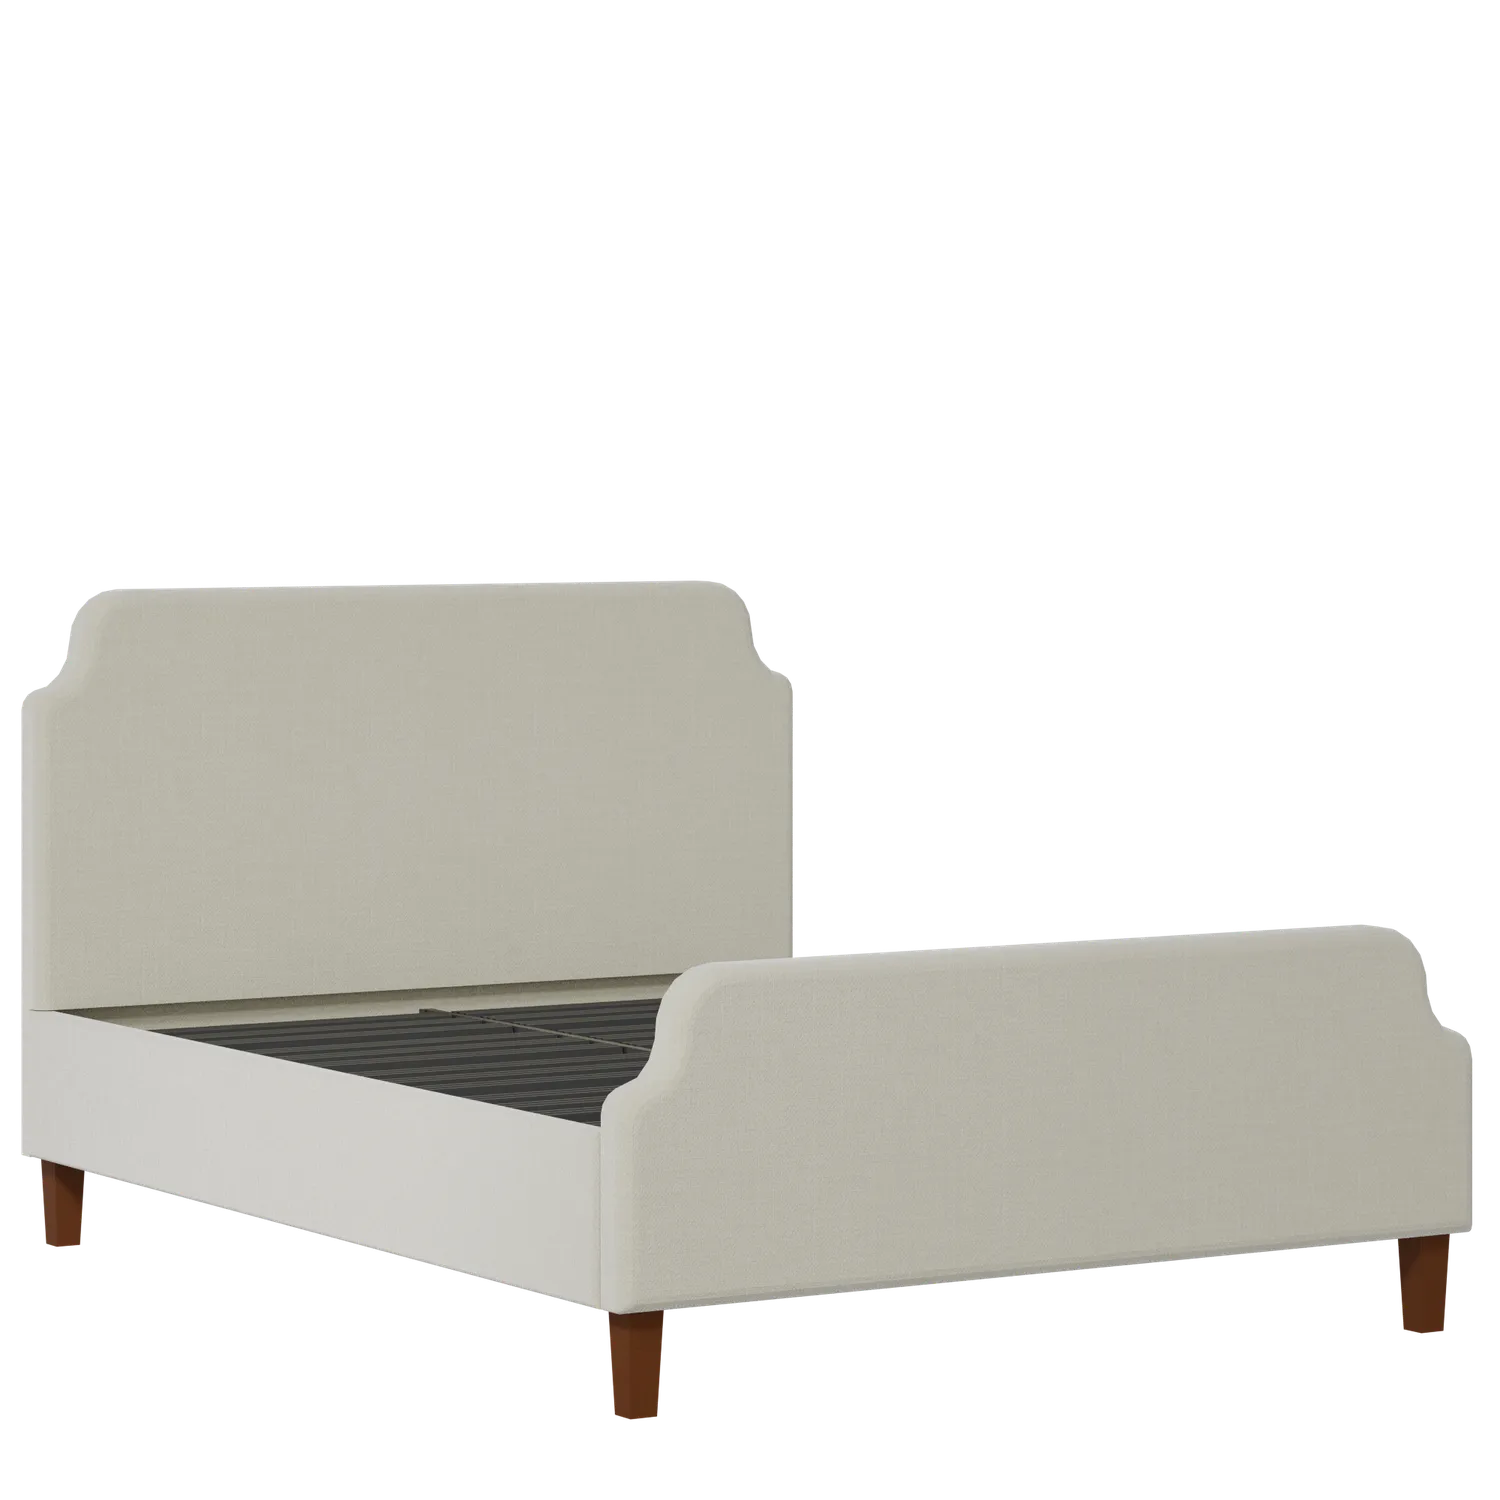 Charing upholstered bed in oatmeal fabric